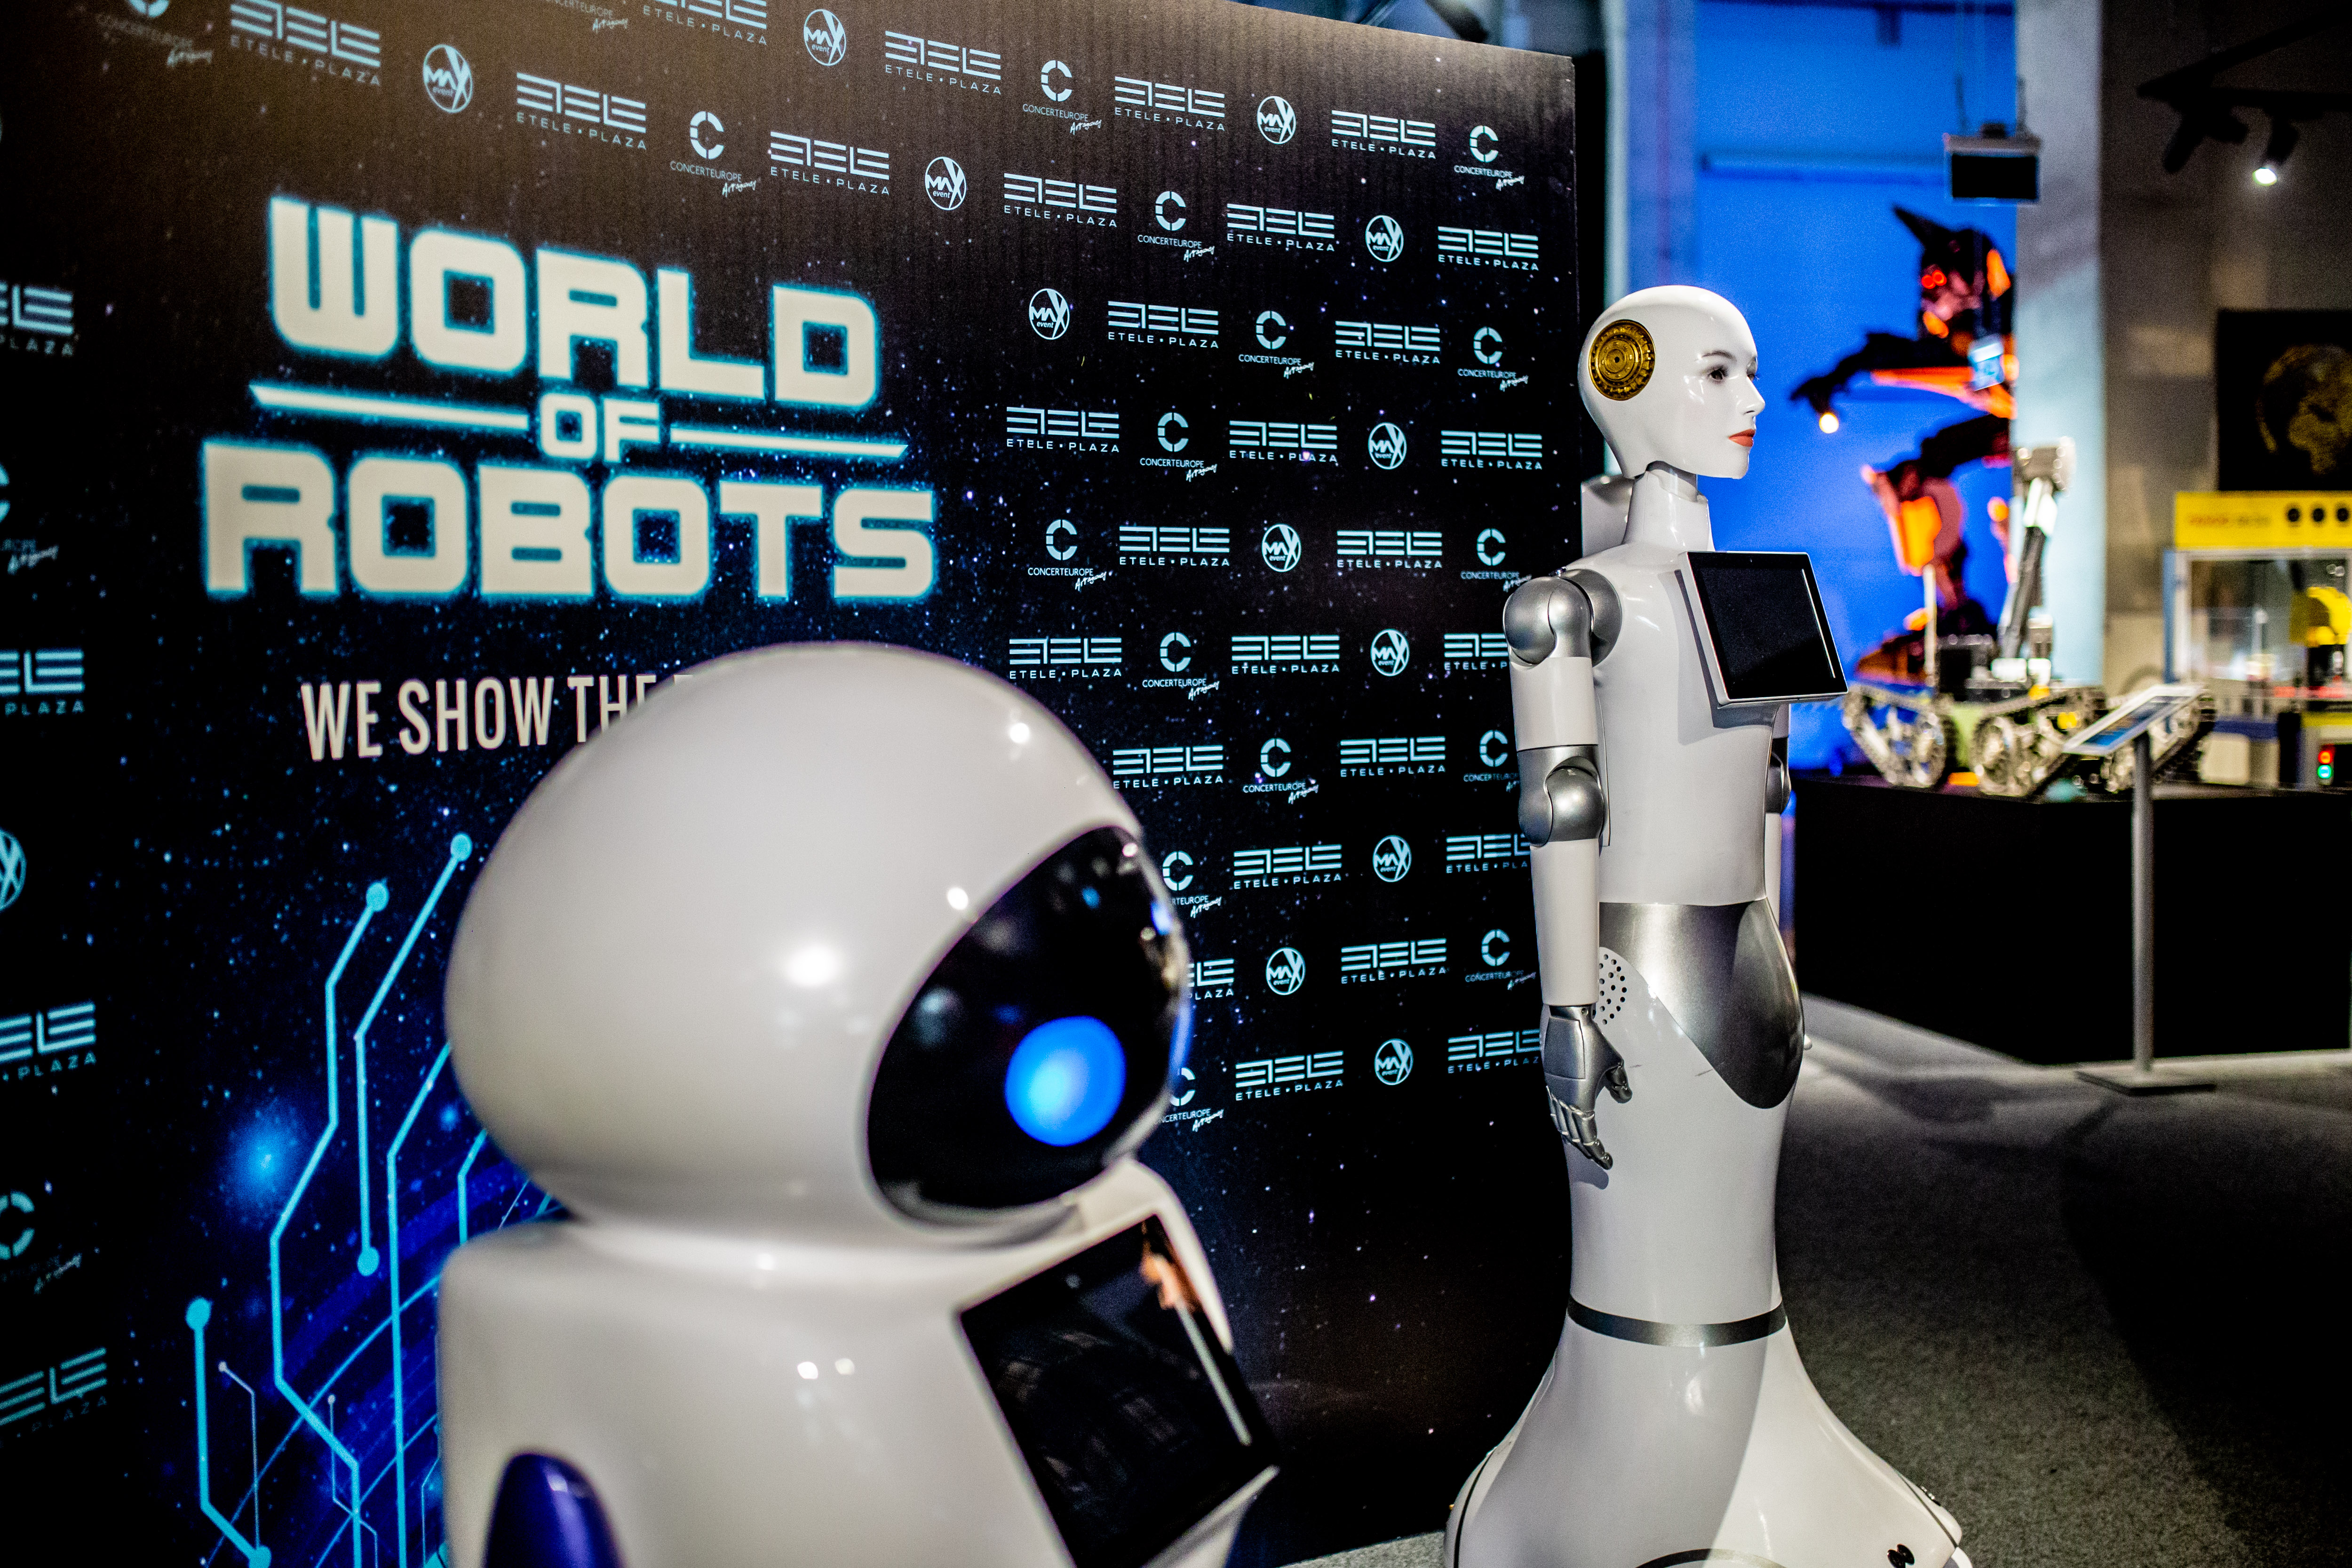 Discover the World of Robots at Etele Plaza